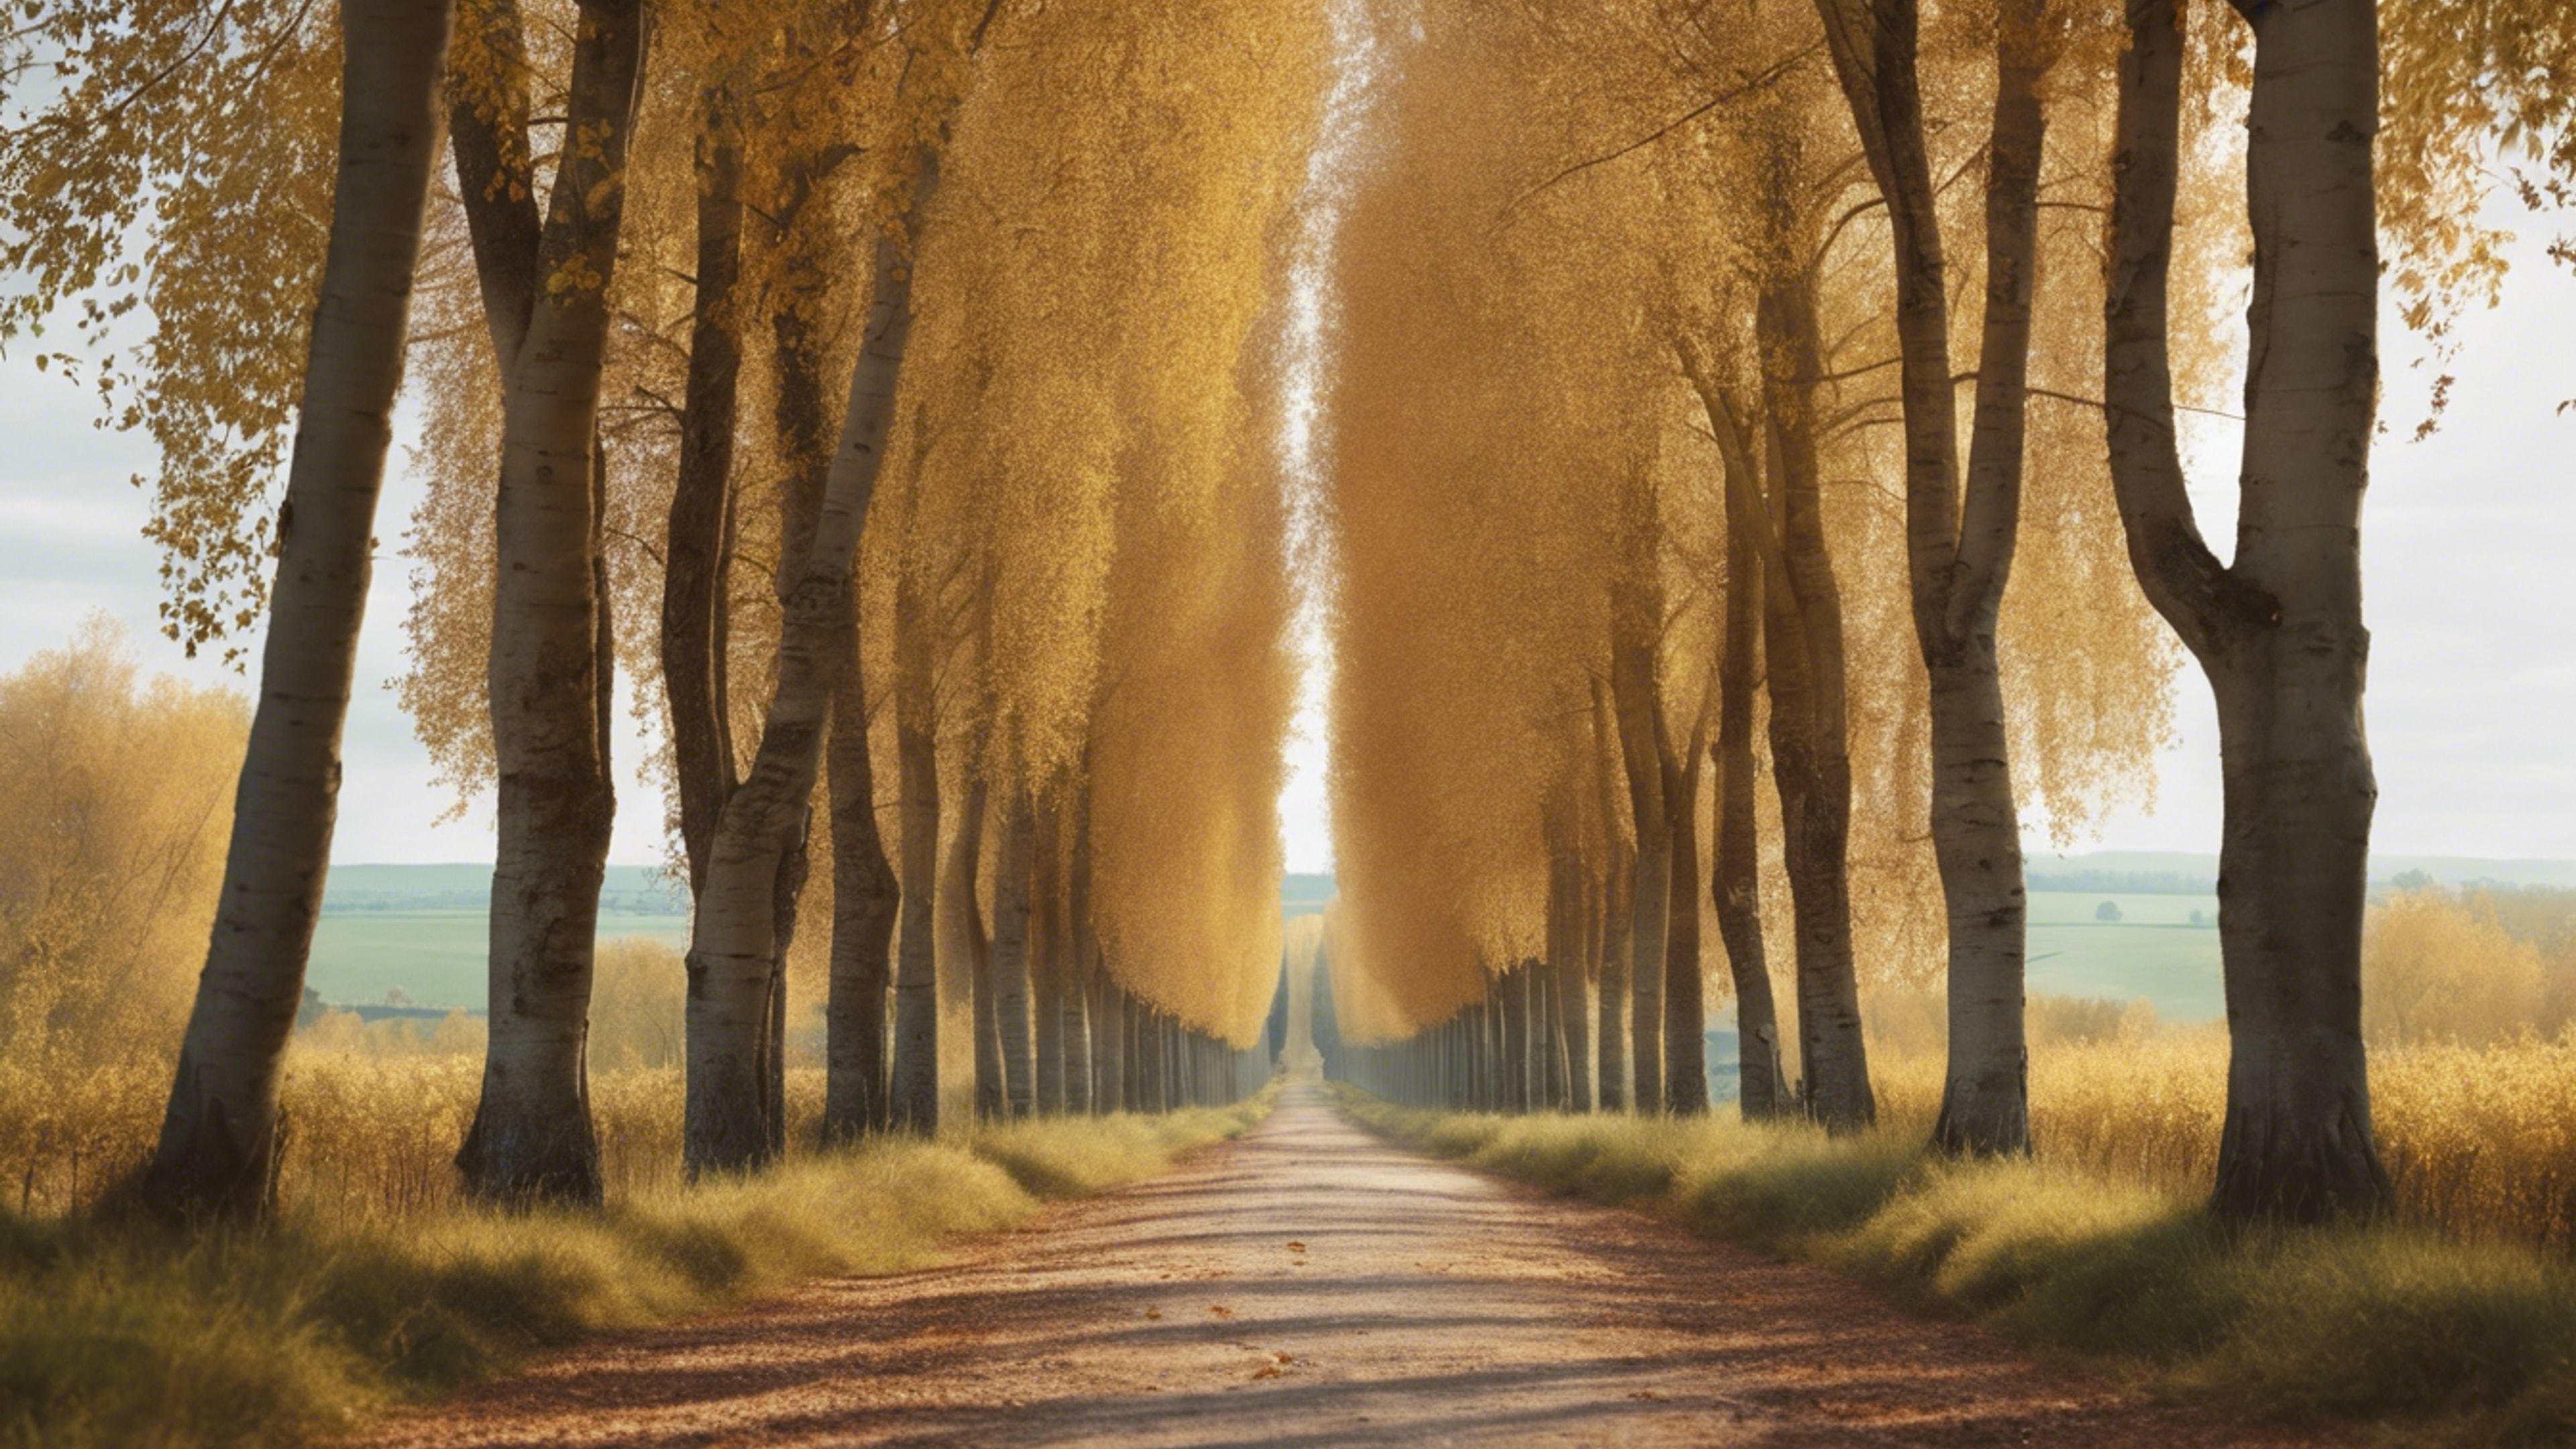 A peaceful French country lane lined with tall, mature poplar trees in autumn. Tapeet[76d1ad7093004c7494eb]